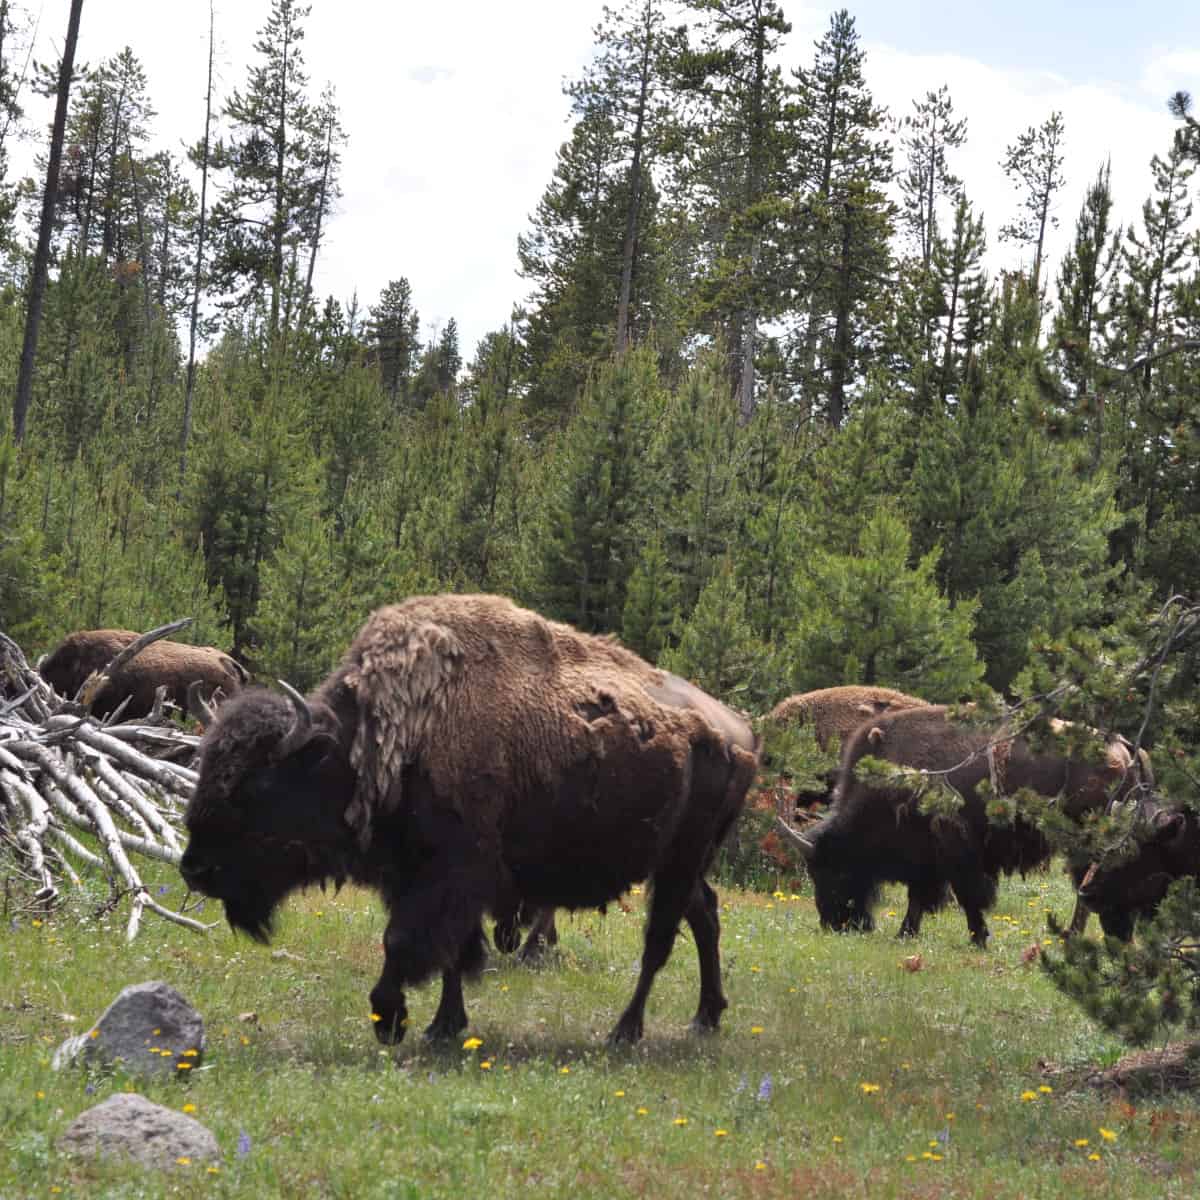 Bison at Yellowstone Park